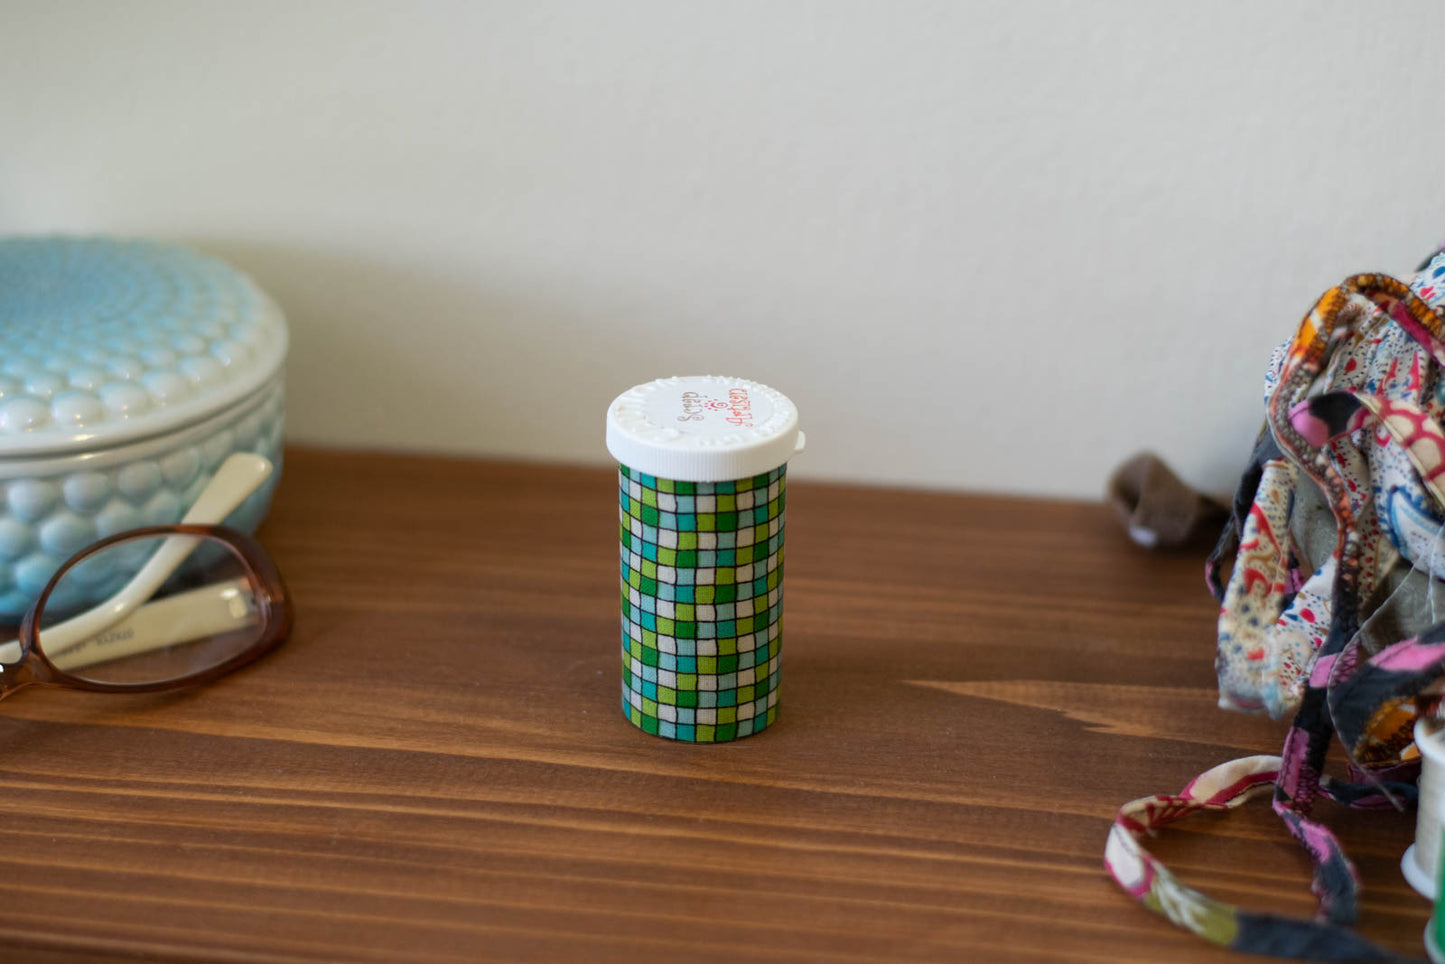 upcycled prescription bottle sewing kit — green tiles, 2.75" high, easy open lid, closed